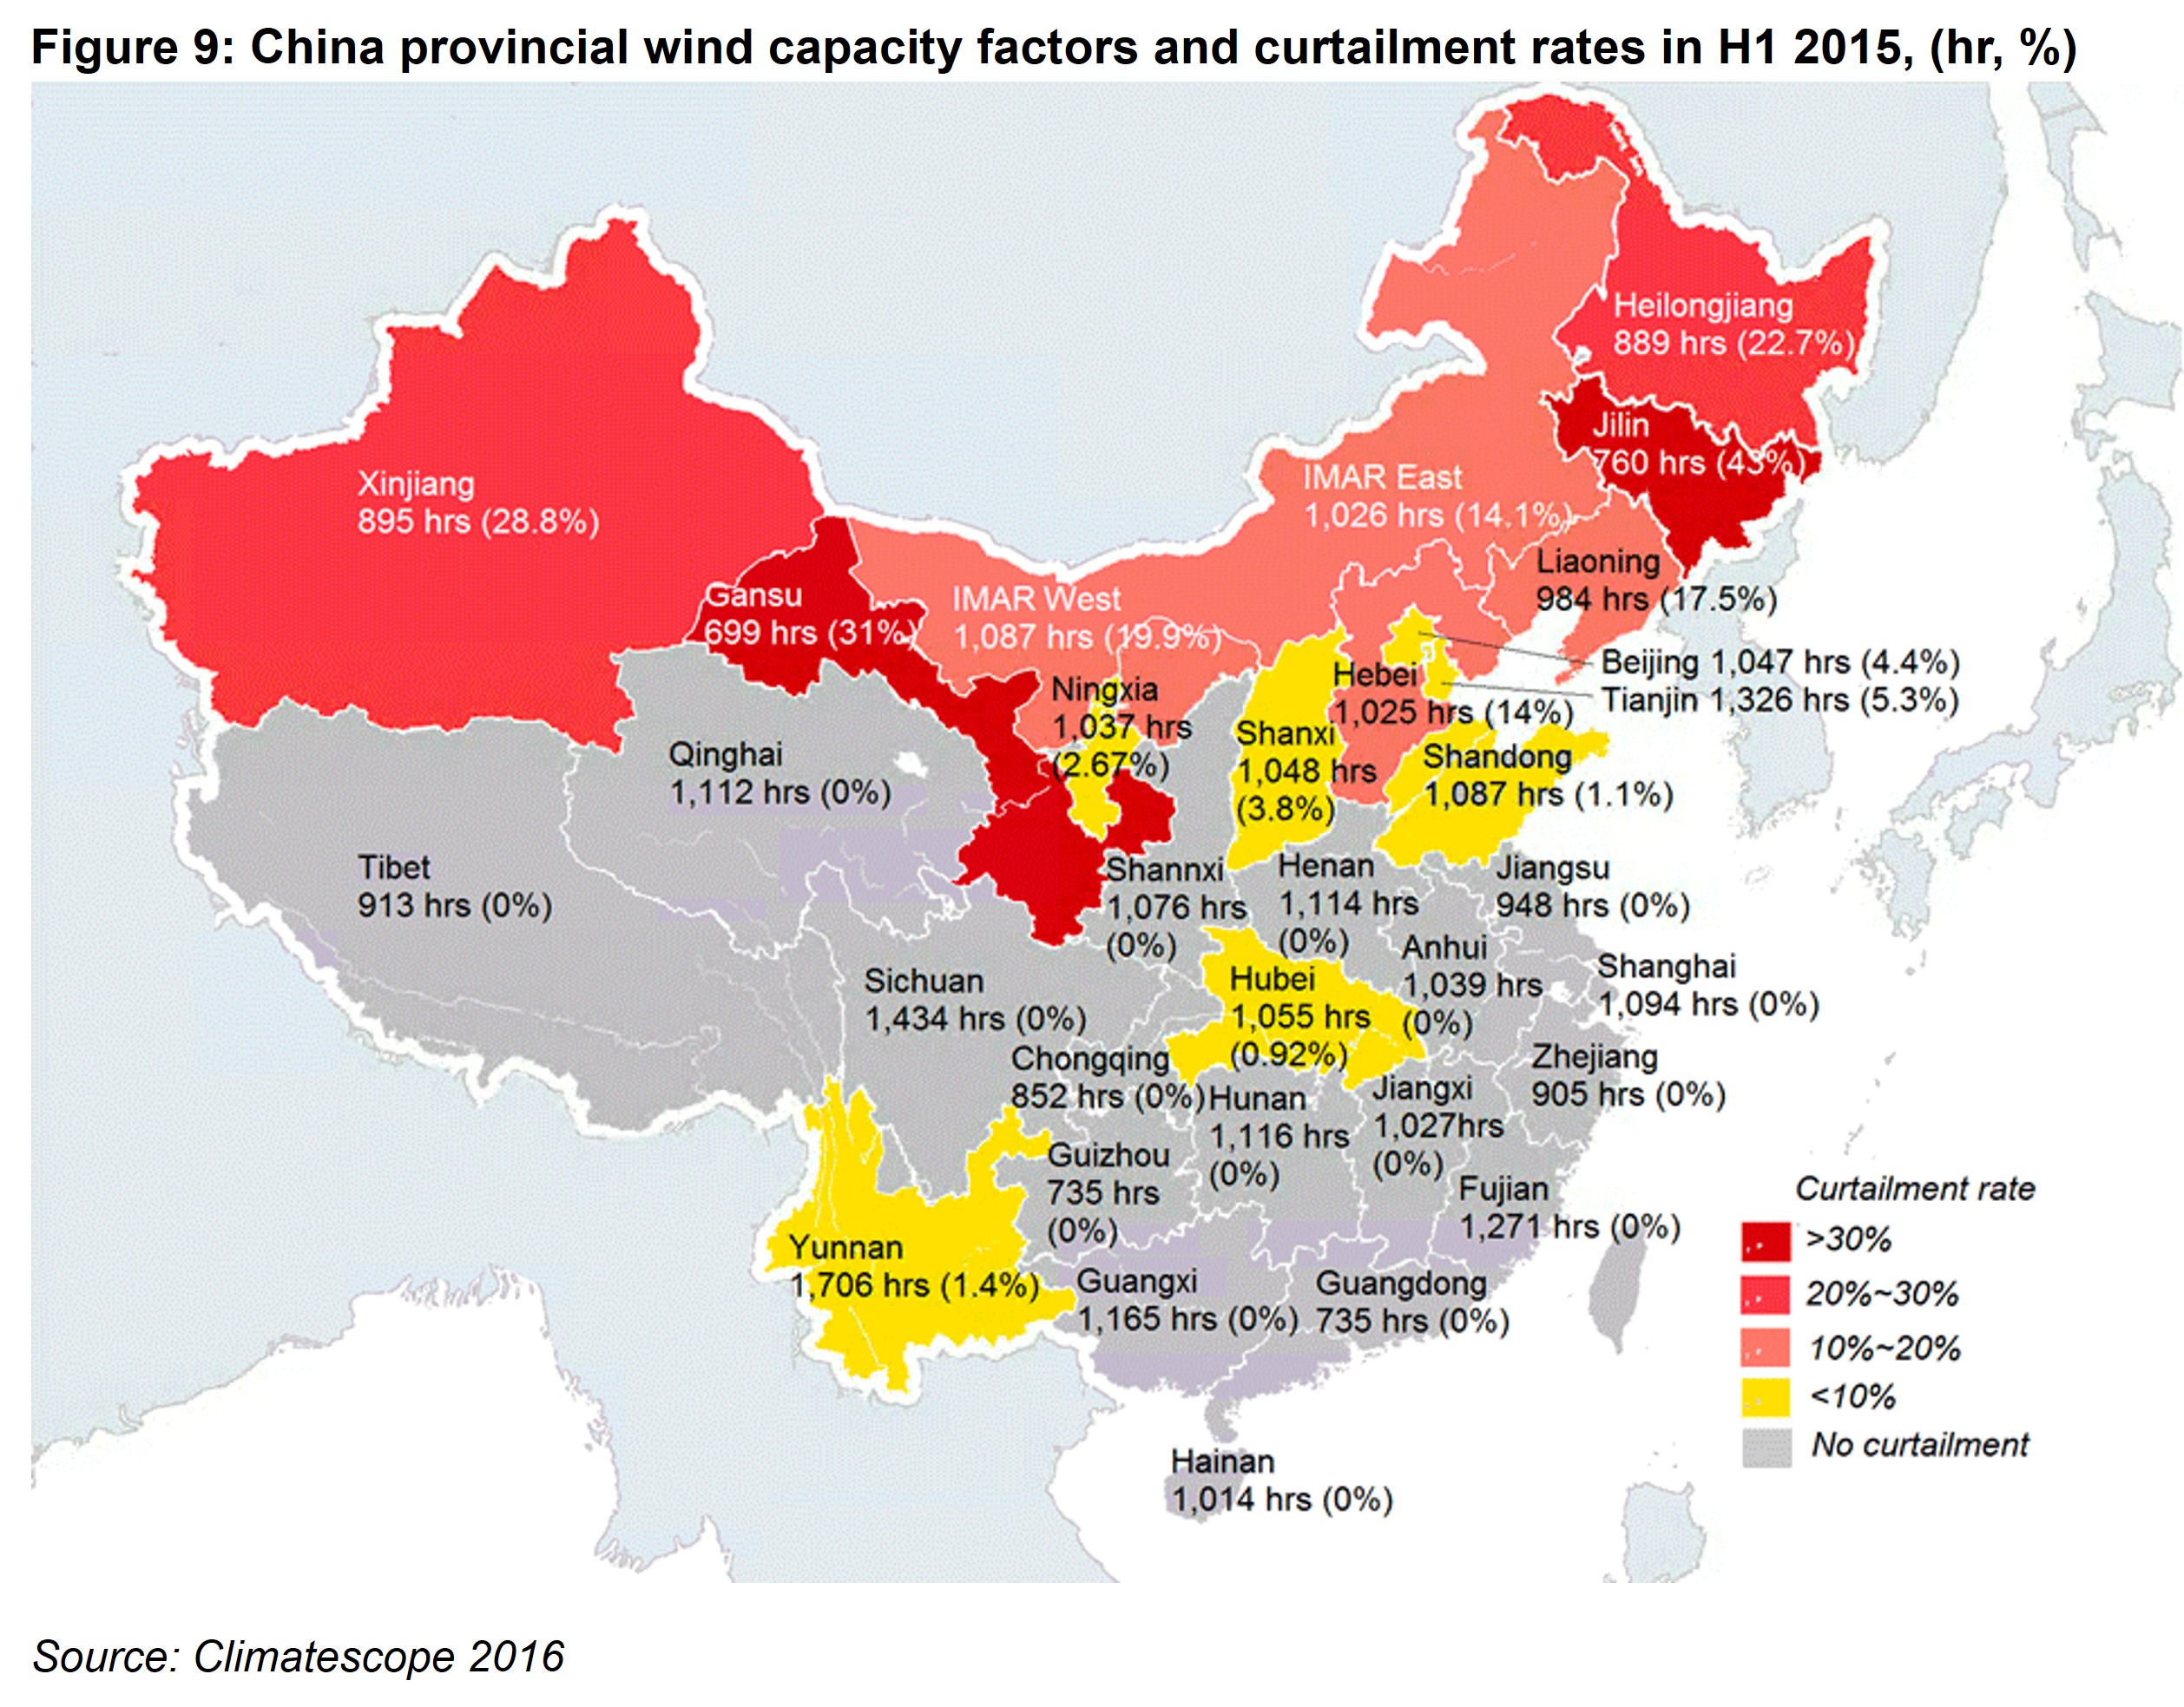 Asia Fig 9 - China provincial wind capacity factors and curtailment rates in H1 2015, (hr, %)